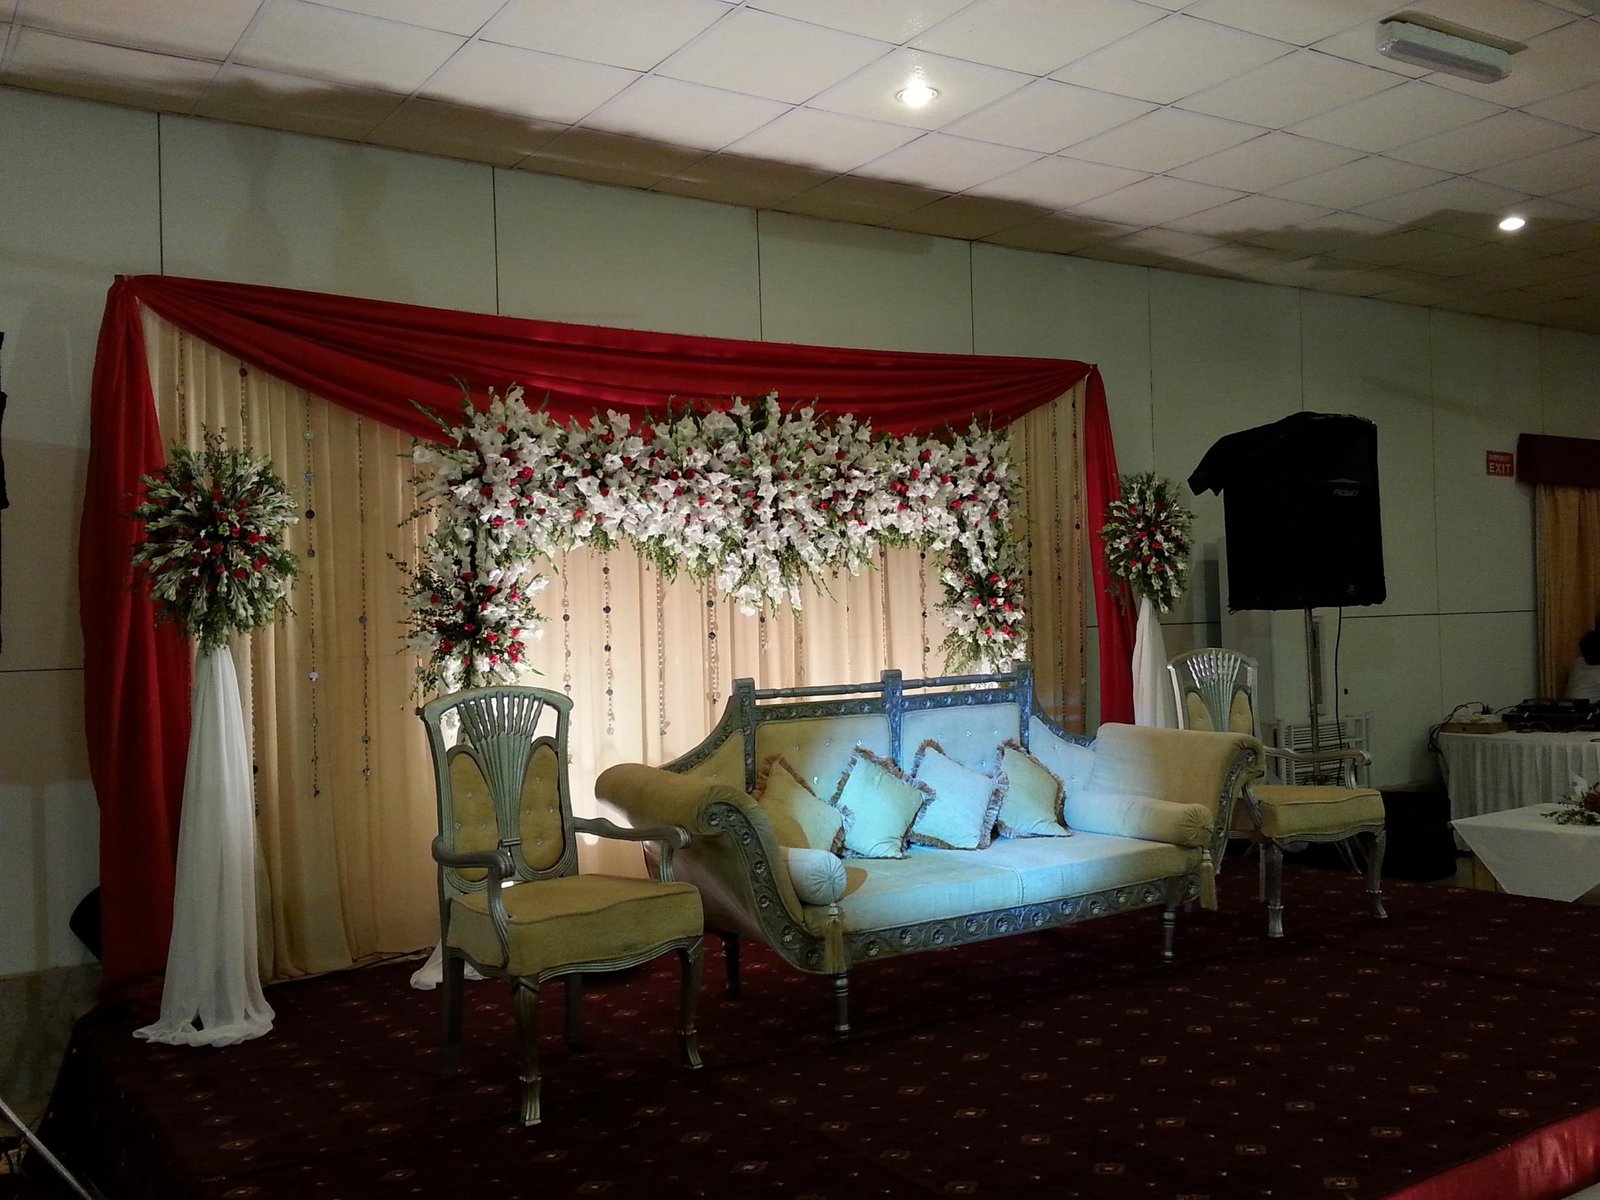 Five Star Marquee, koral chowck, service road, Opposite Koral Police Station , Islamabad